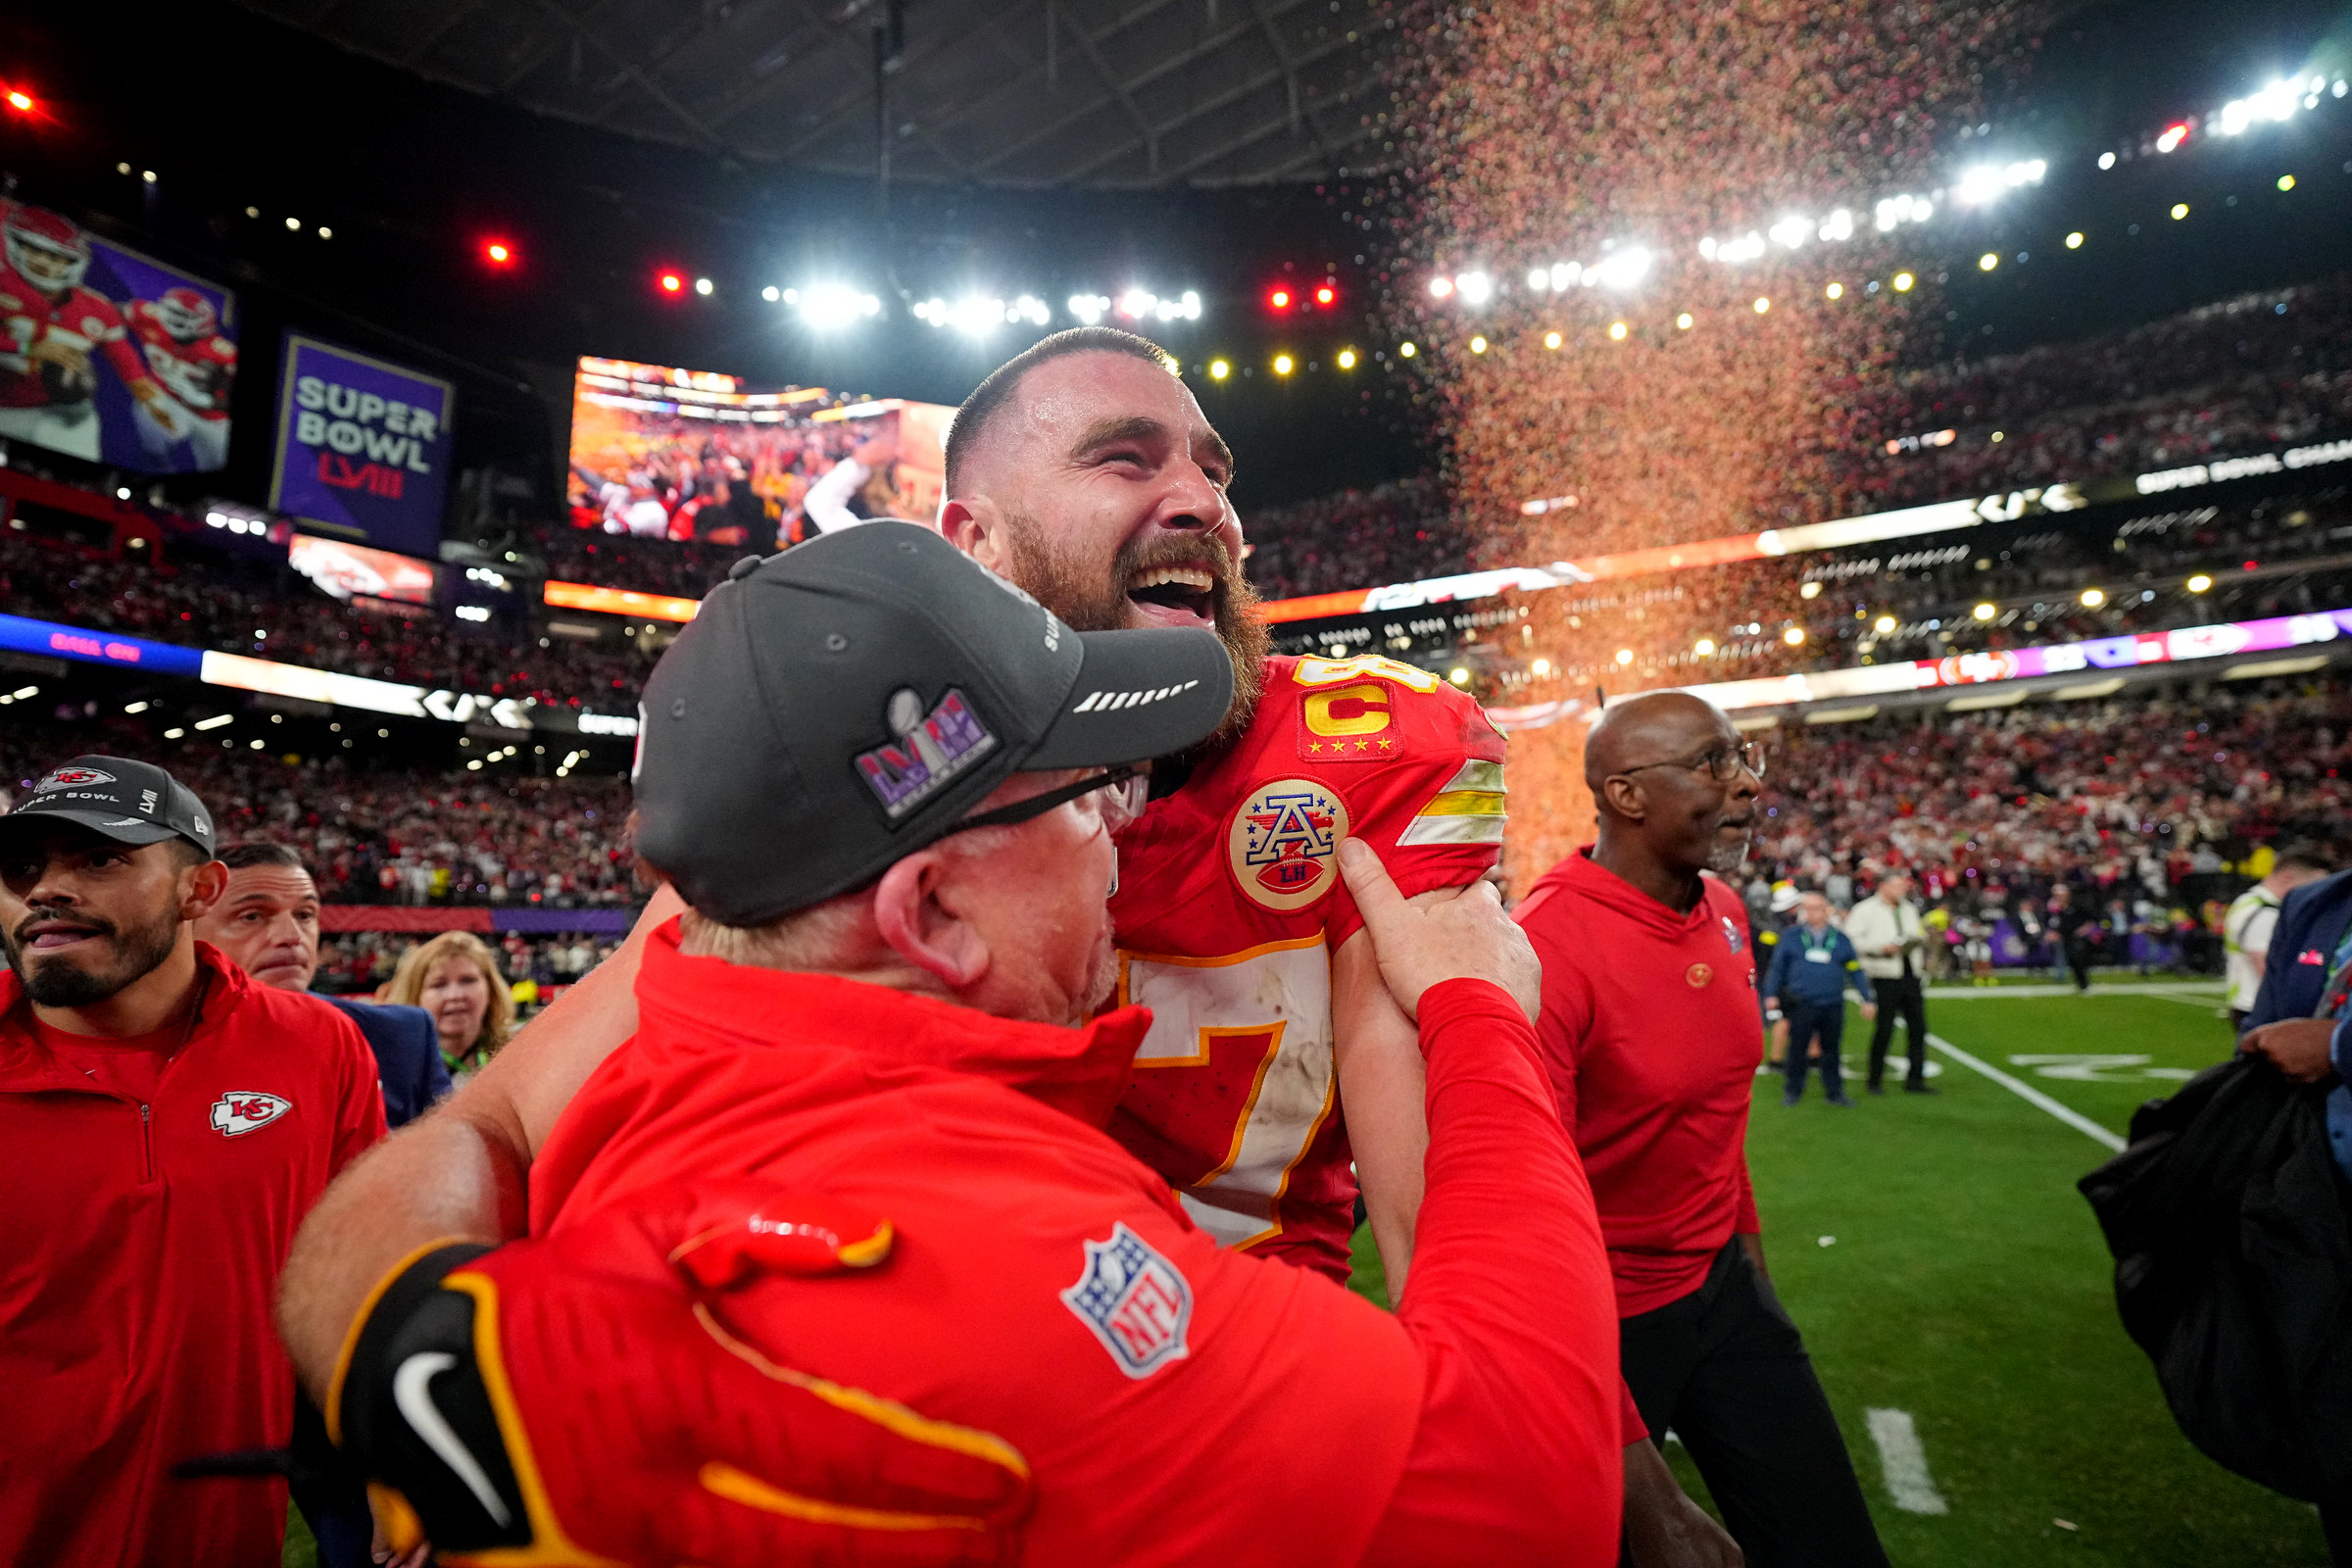 Andy Reid and Travis Kelce celebrating their Super Bowl win